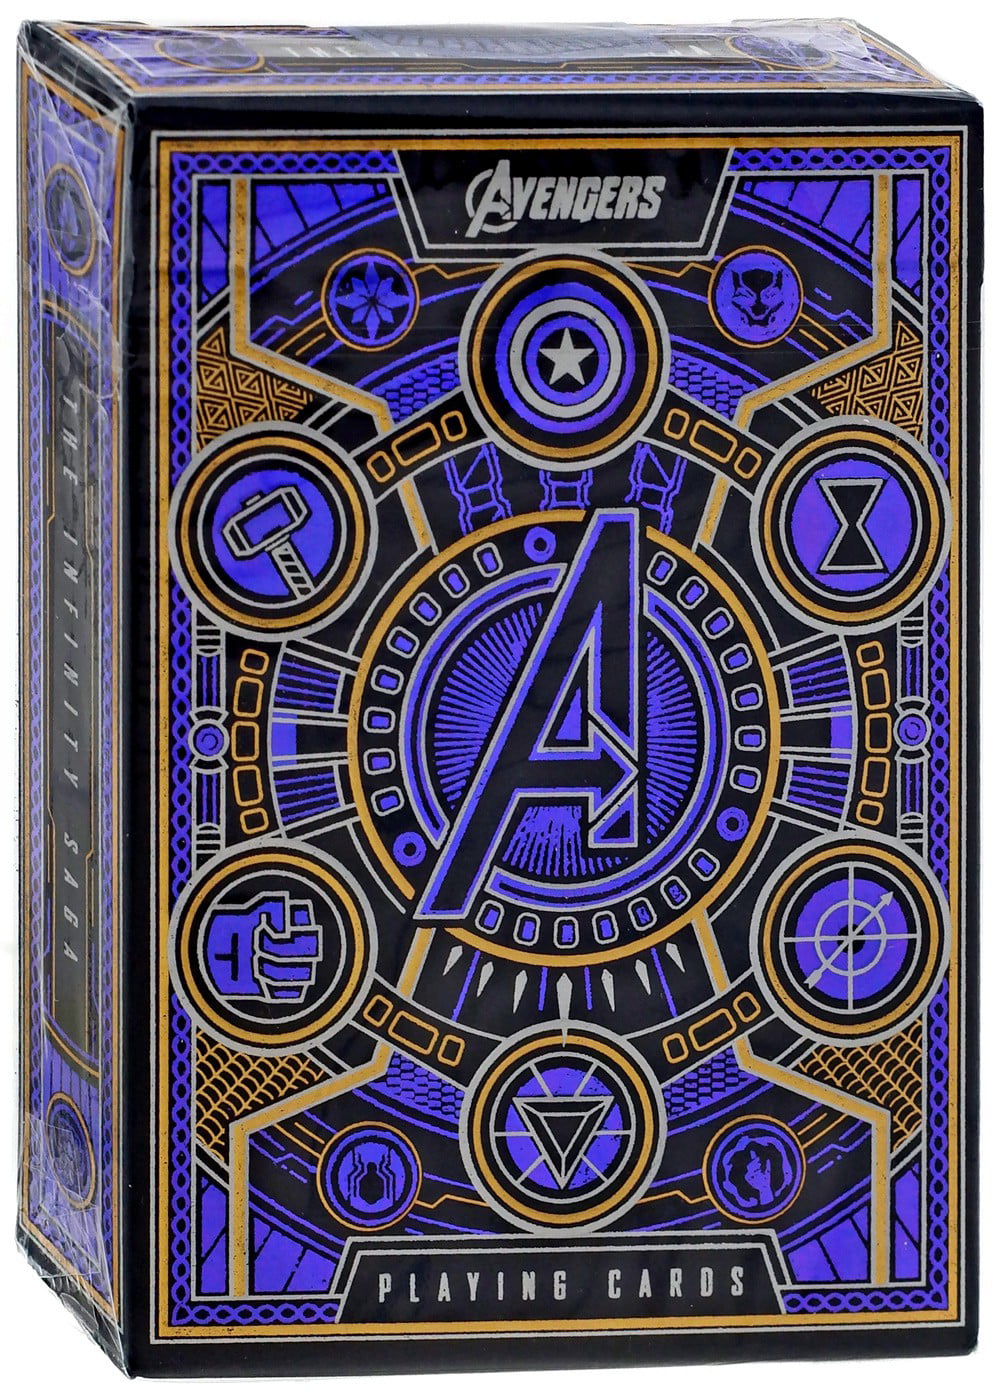 AVENGERS SPIDER-MAN MARVEL MOVIE PLAYING CARD DECK 52 CARDS NEW 